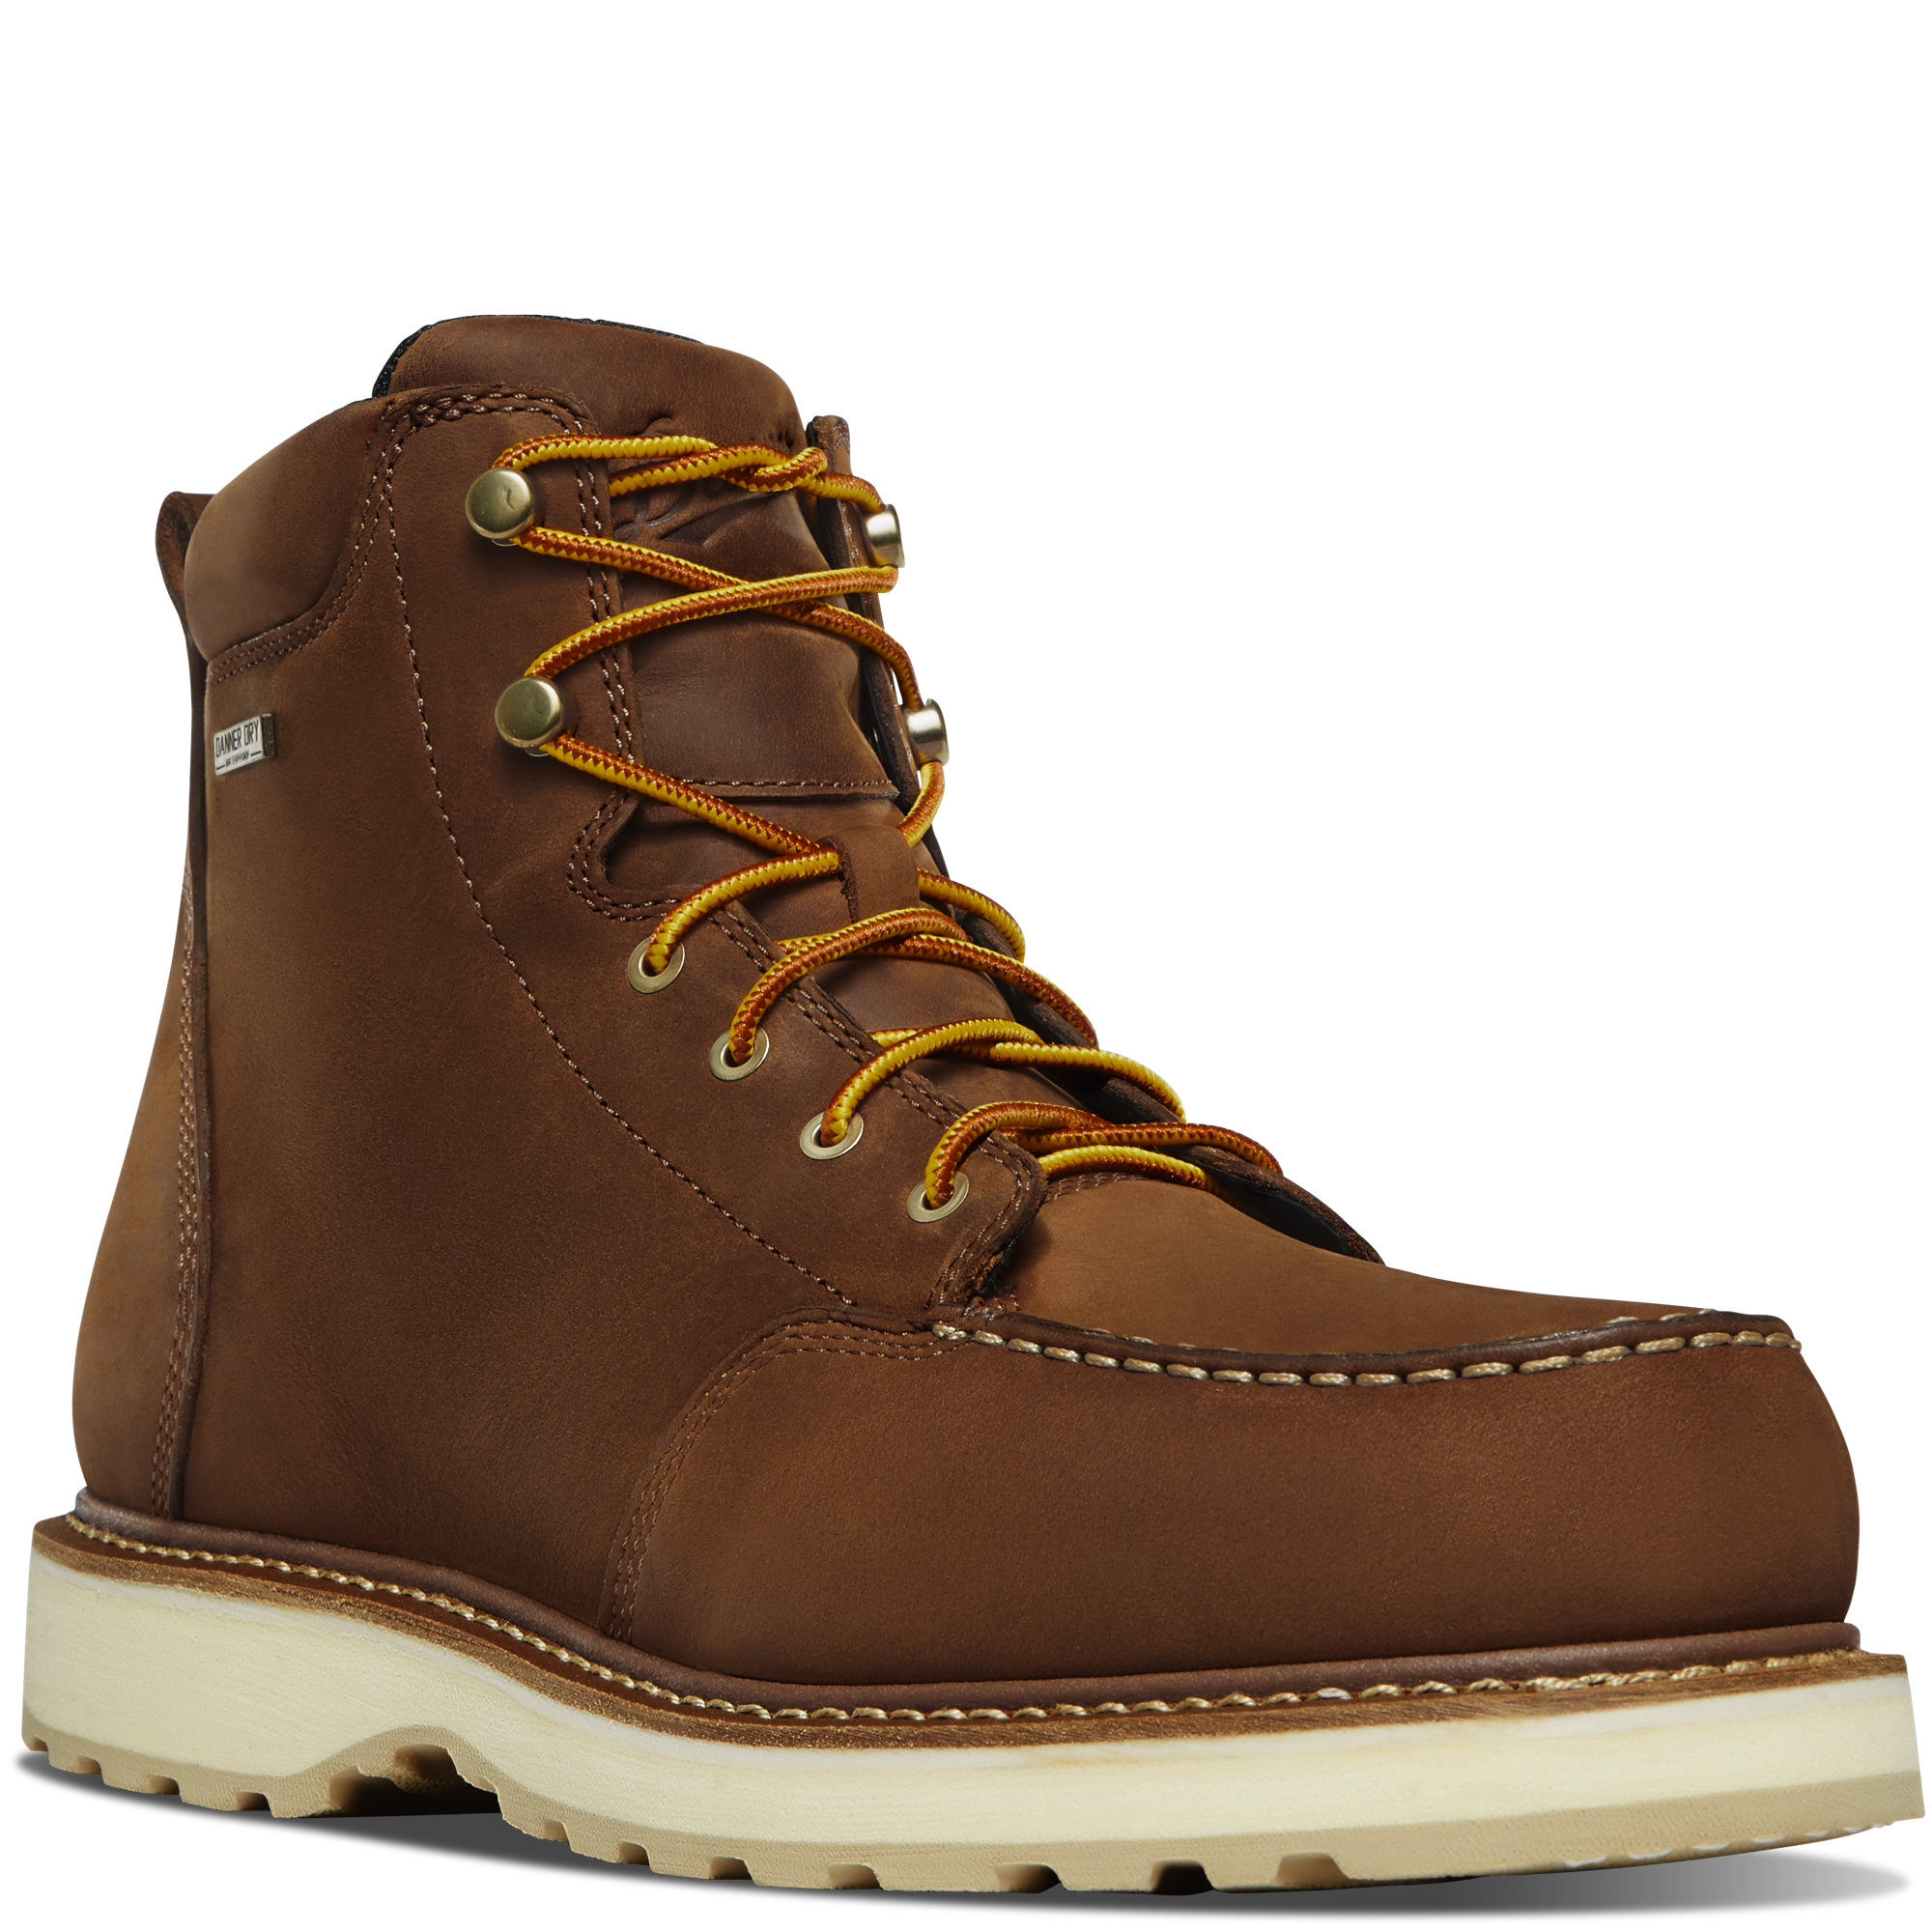 LaCrosse Men's Cedar River 6 Inch Work Boots with Aluminum Toe from Columbia Safety